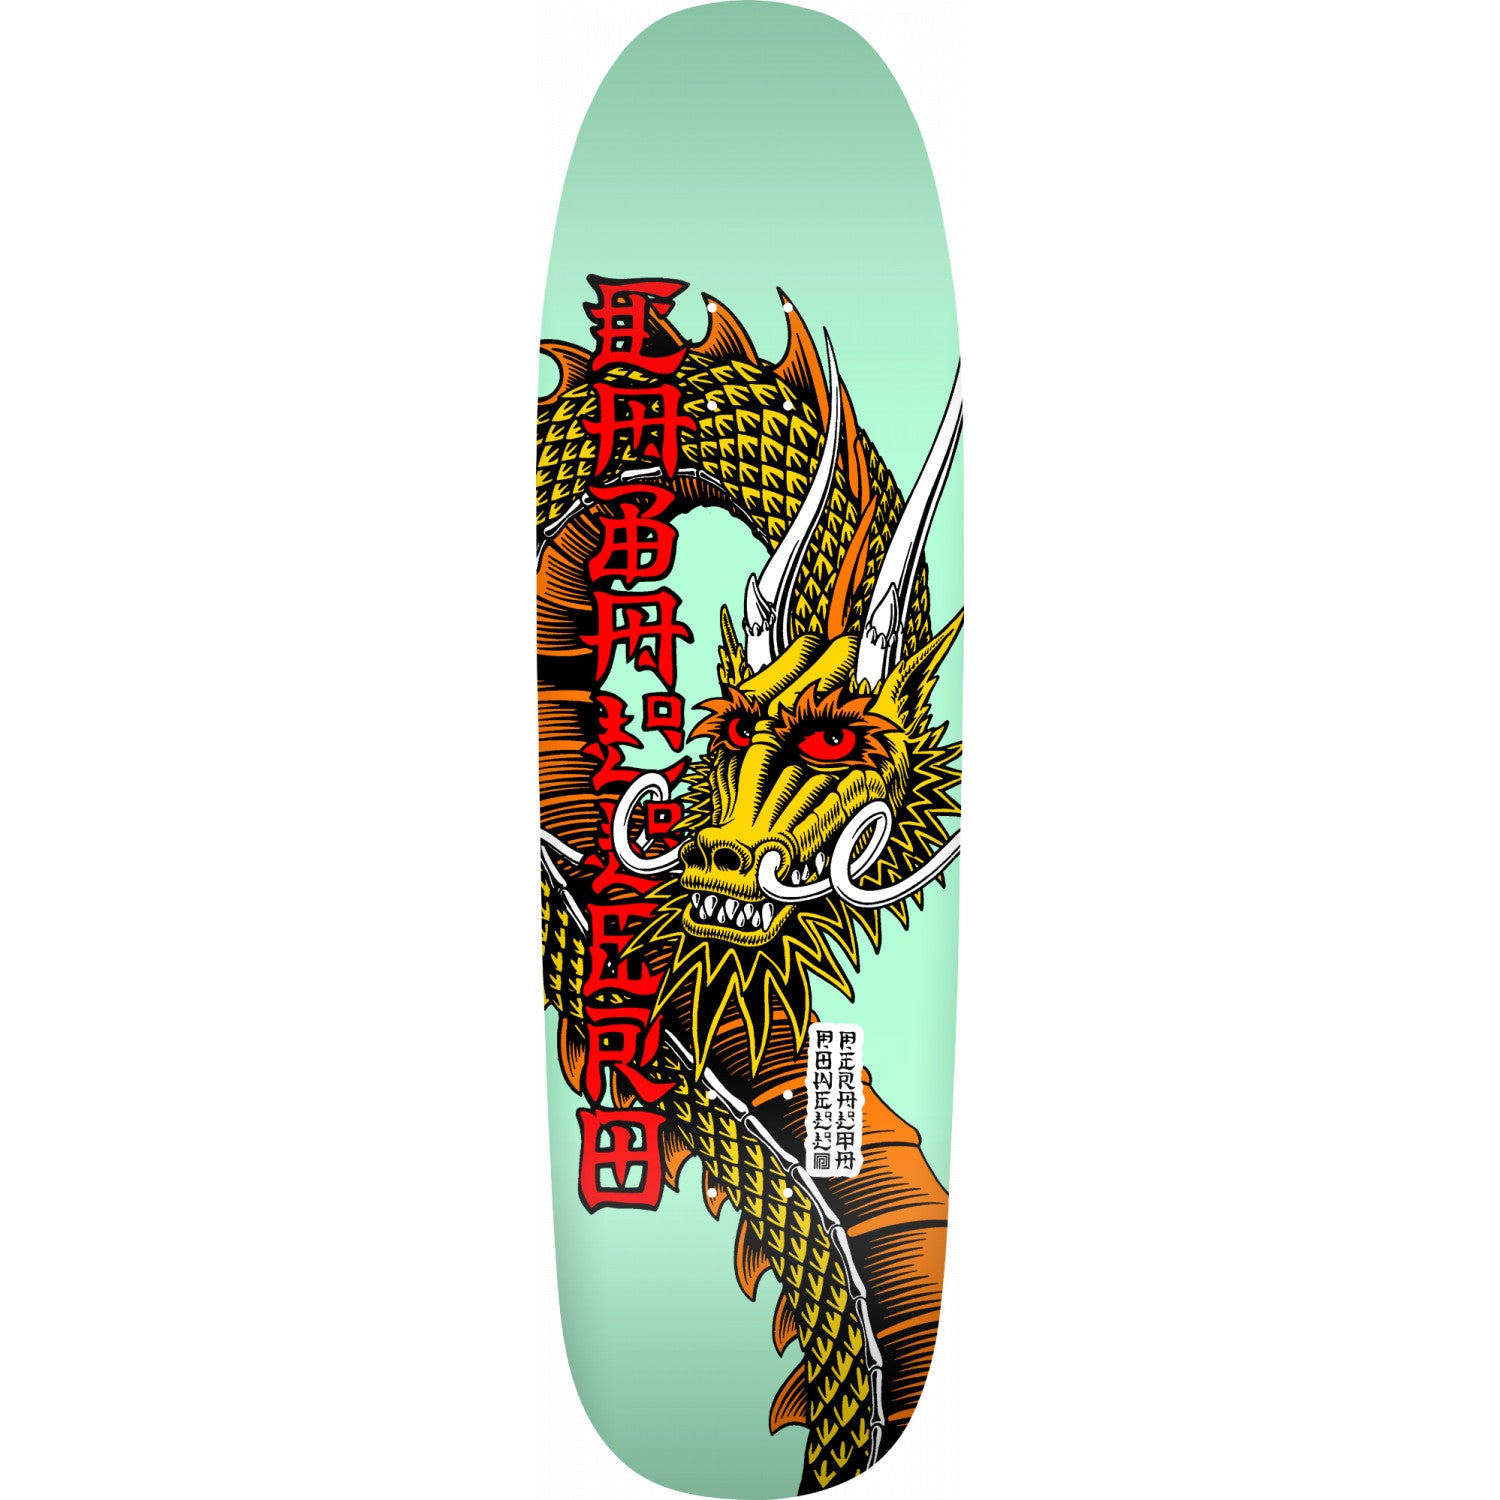 Powell Peralta - Caballero Ban This 9.26 Deck - Mint